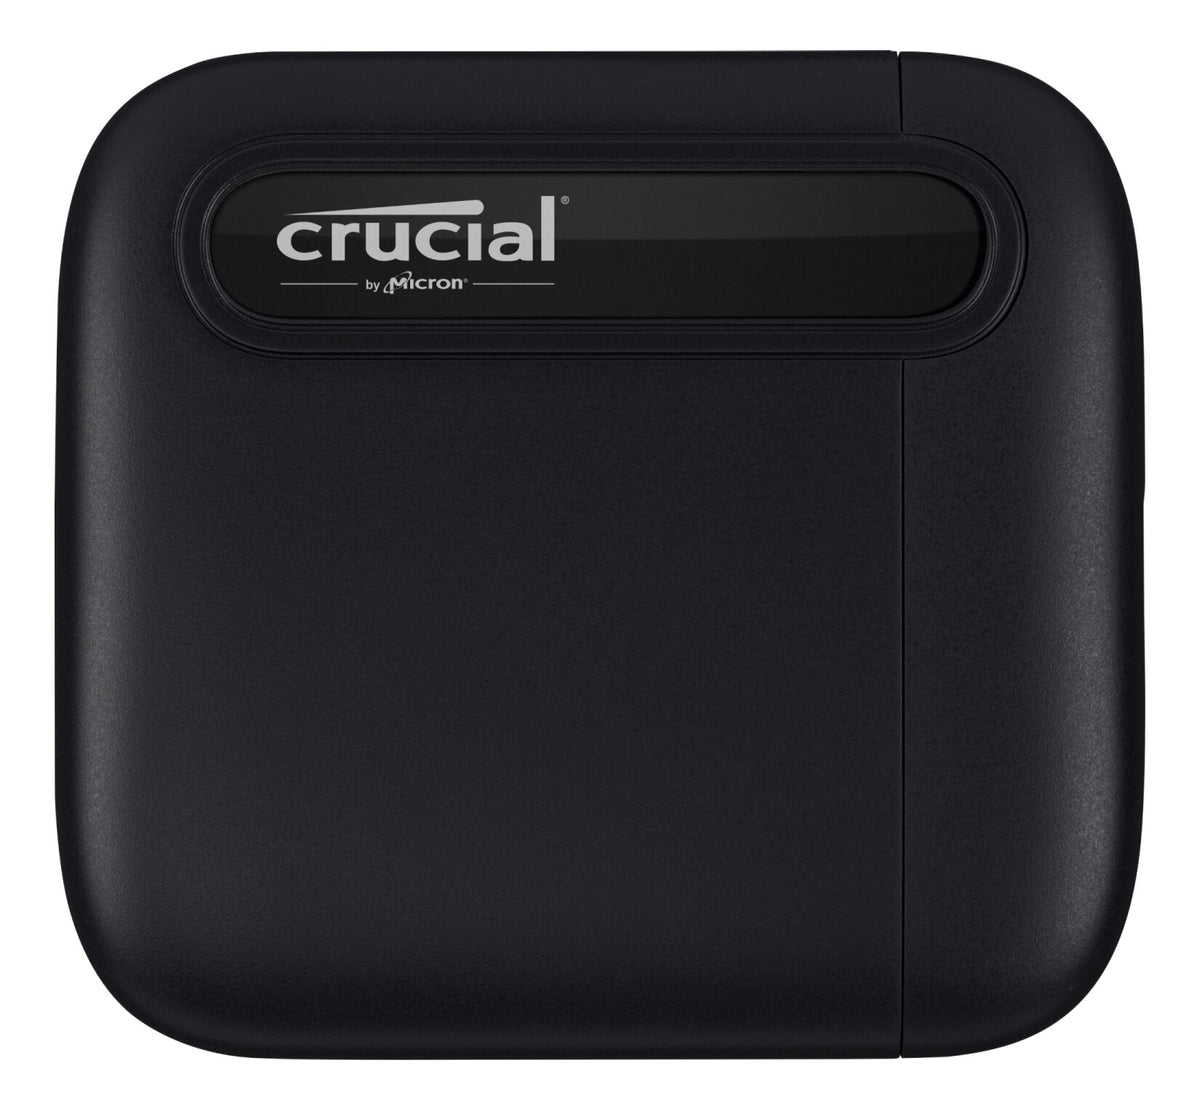 Crucial X6 External solid state drive - 4 TB